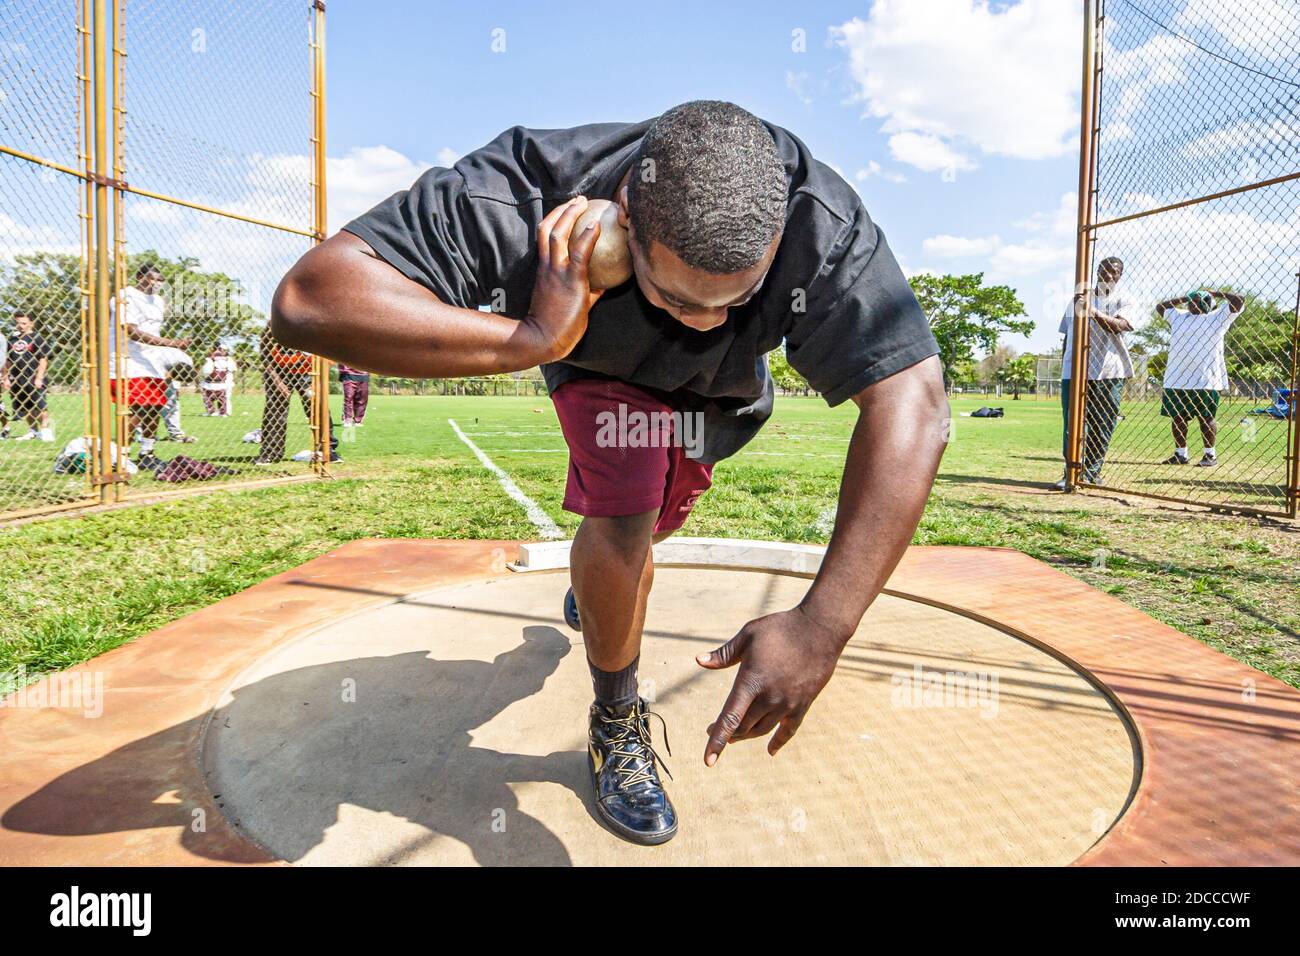 Miami Florida, Tropical Park Greater Miami Athletic Conference Championships, Track & Field High School Student students concentration, shot put competit Stockfoto